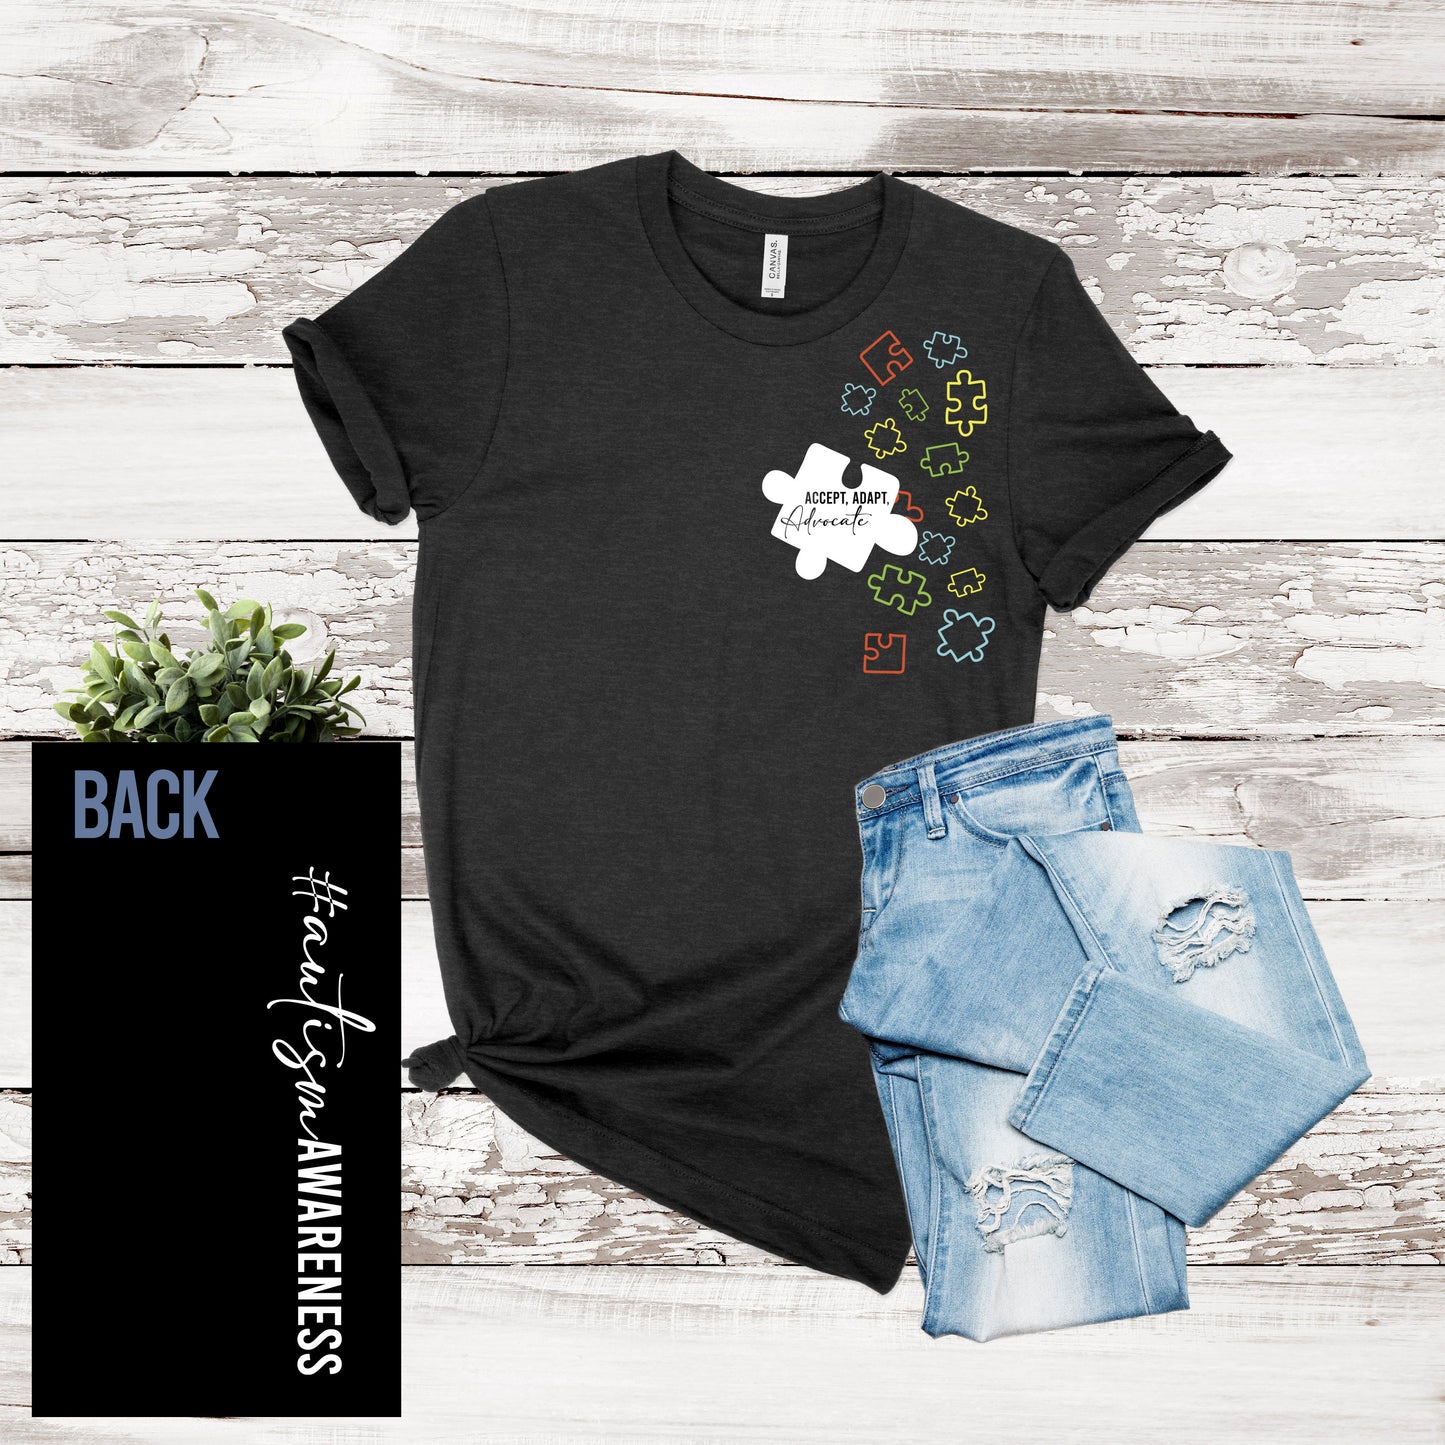 2022 Autism Awareness Month Sale - Adult/Youth T-shirt- Unisex Adults